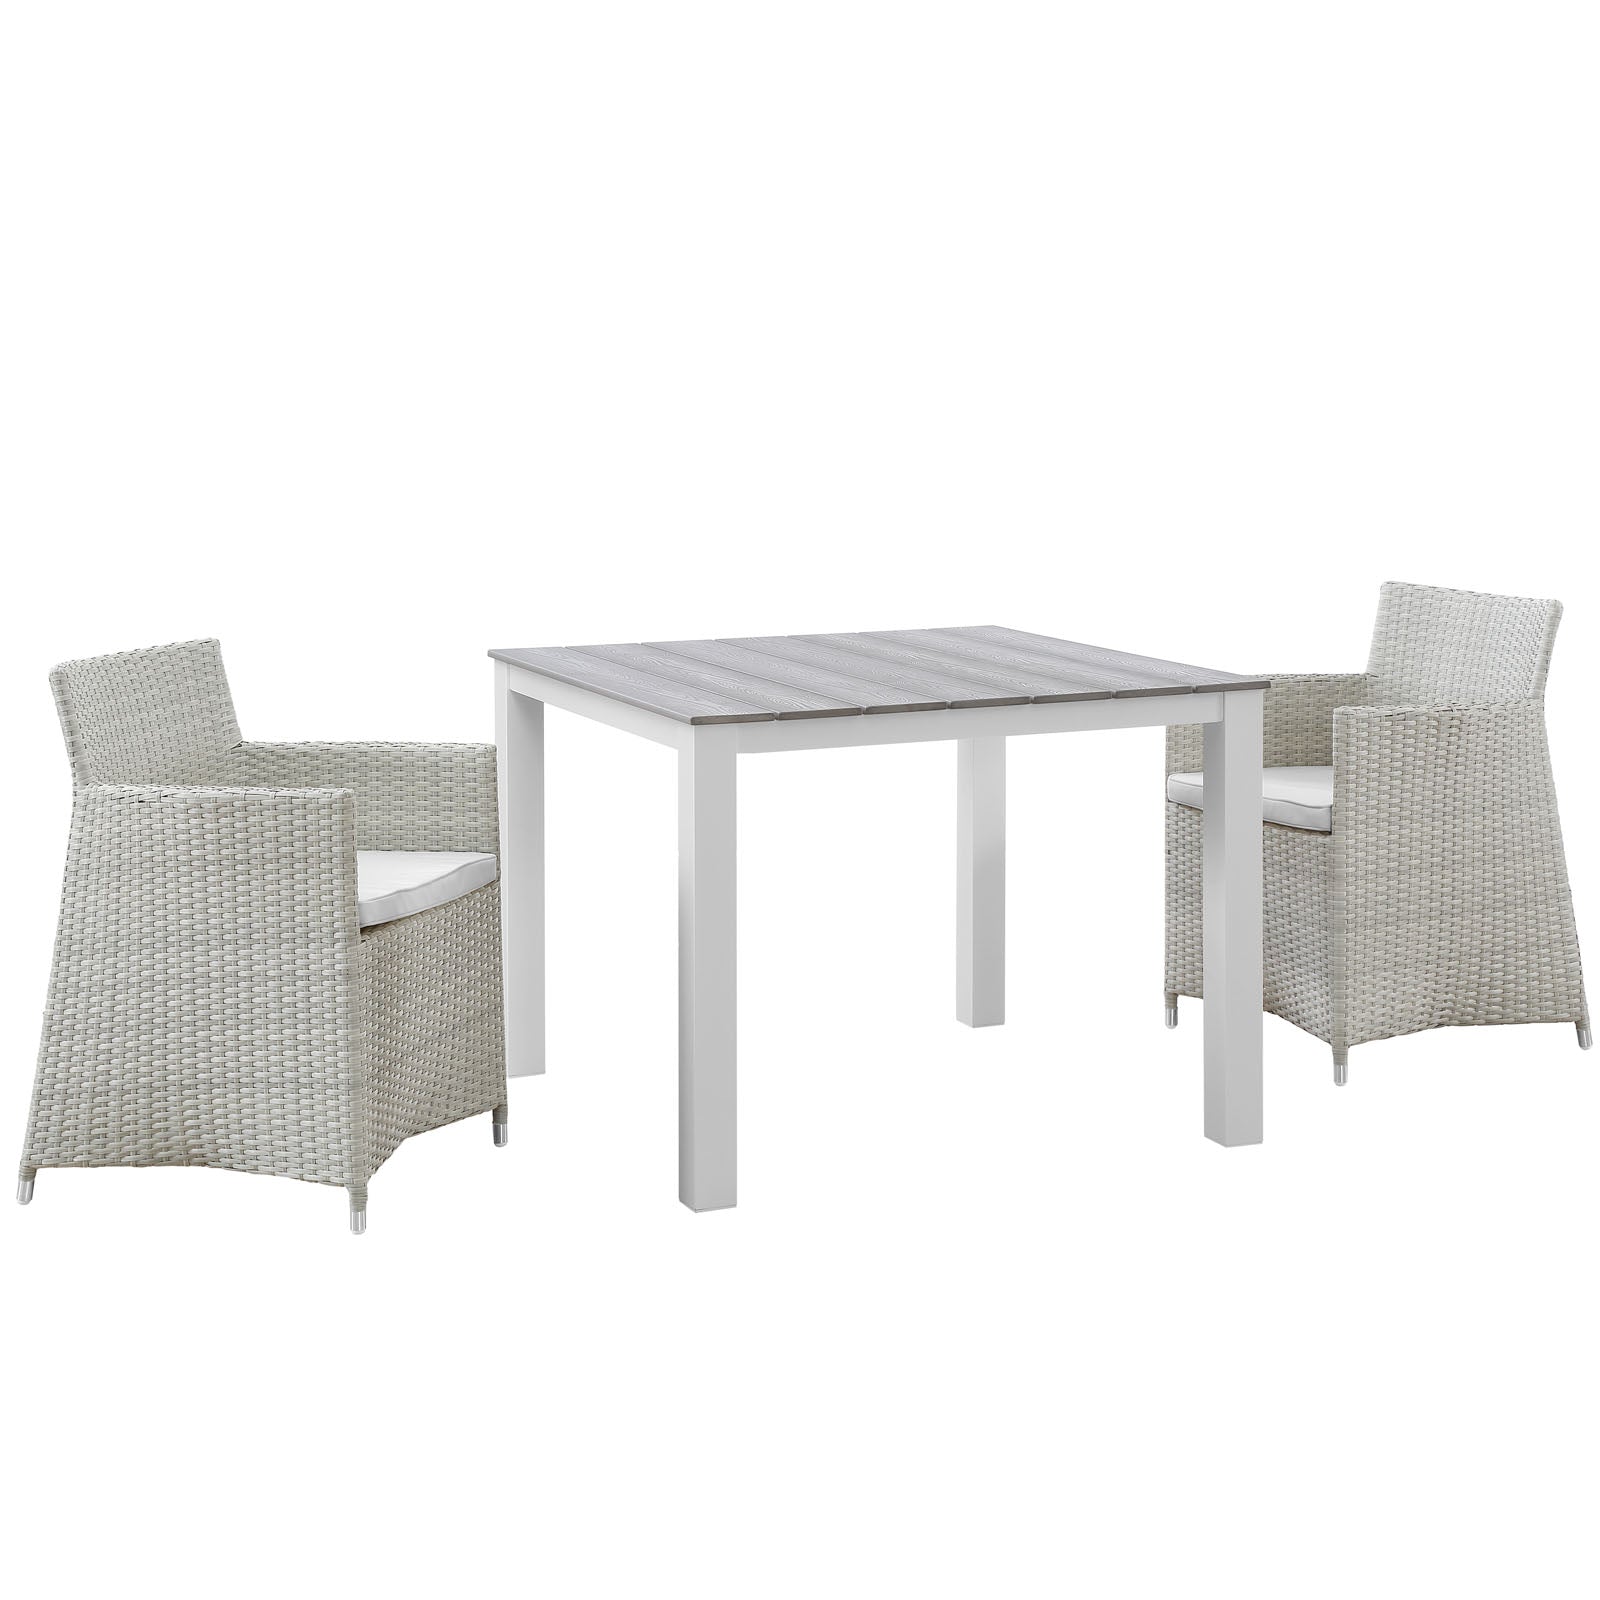 Modway Outdoor Dining Sets - Junction 3 Piece Outdoor Patio Wicker Dining Set Gray White